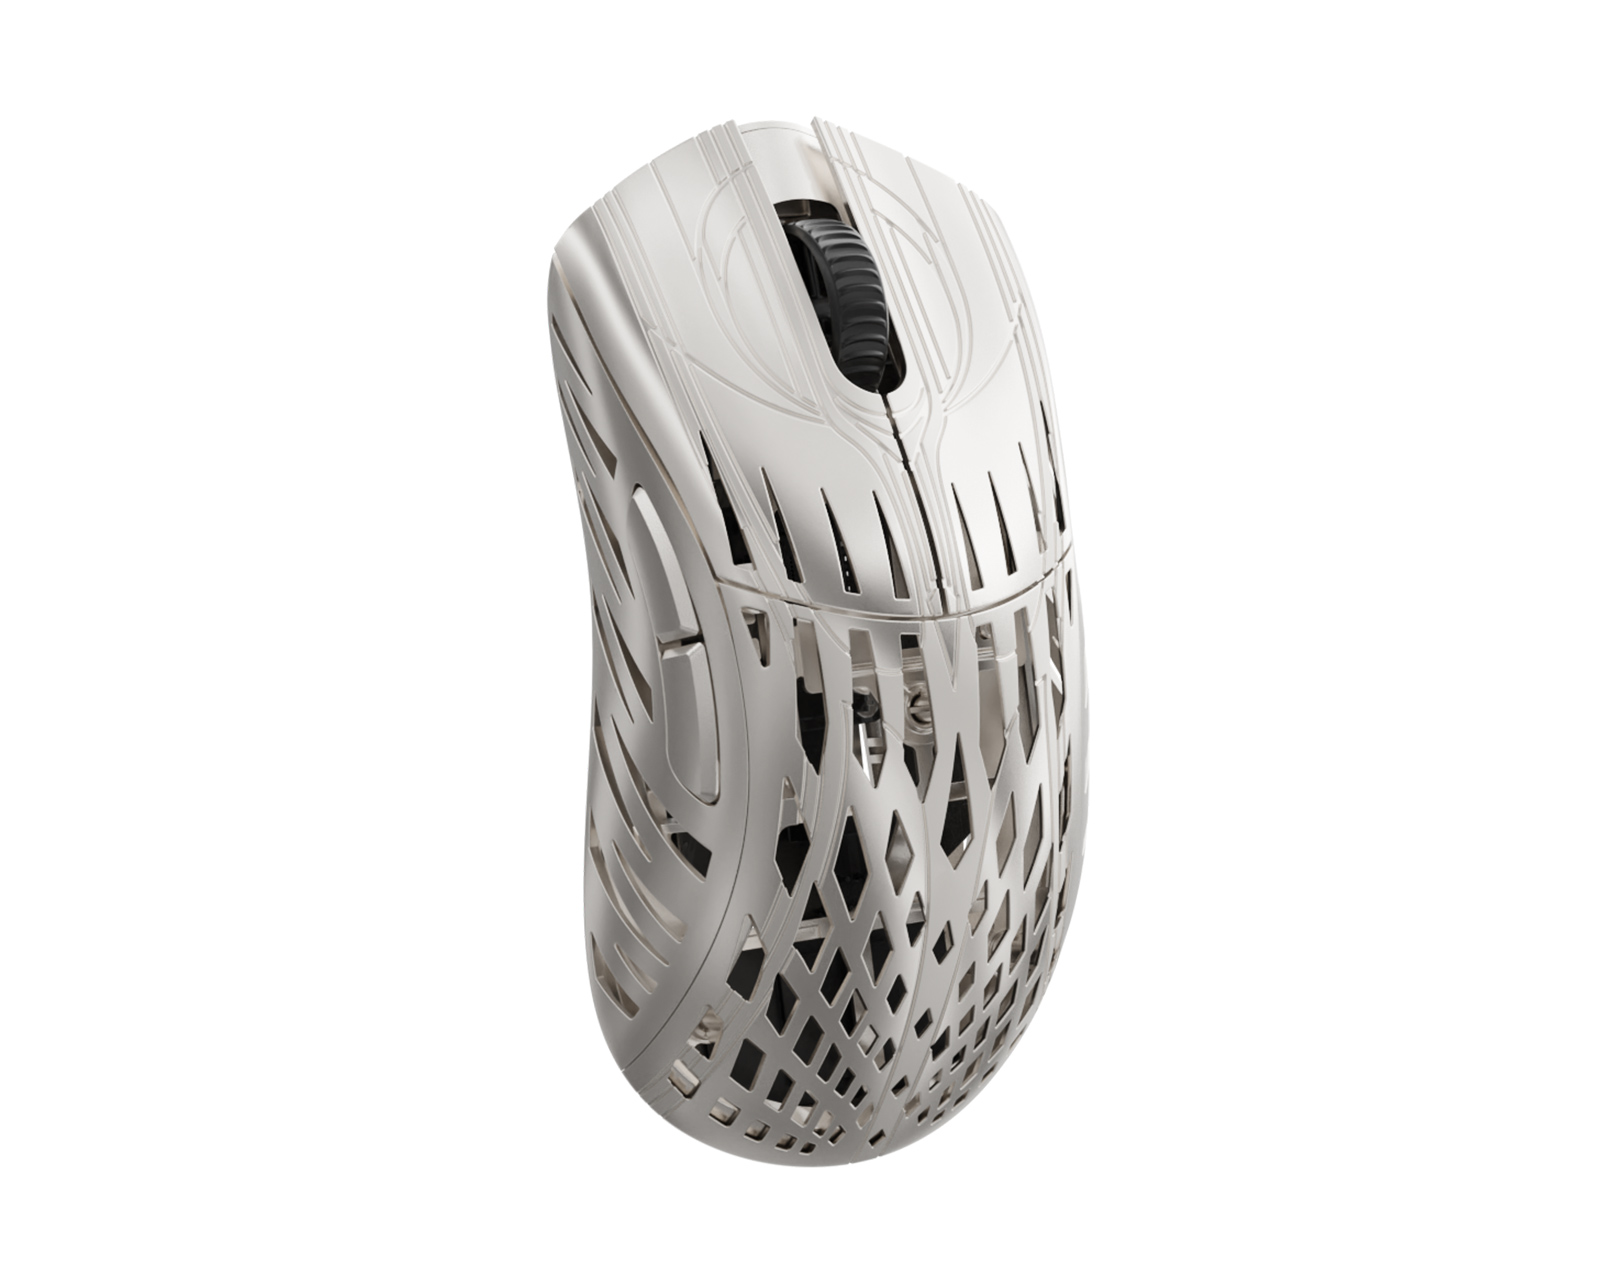 Pwnage Stormbreaker Magnesium Wireless Gaming Mouse - White